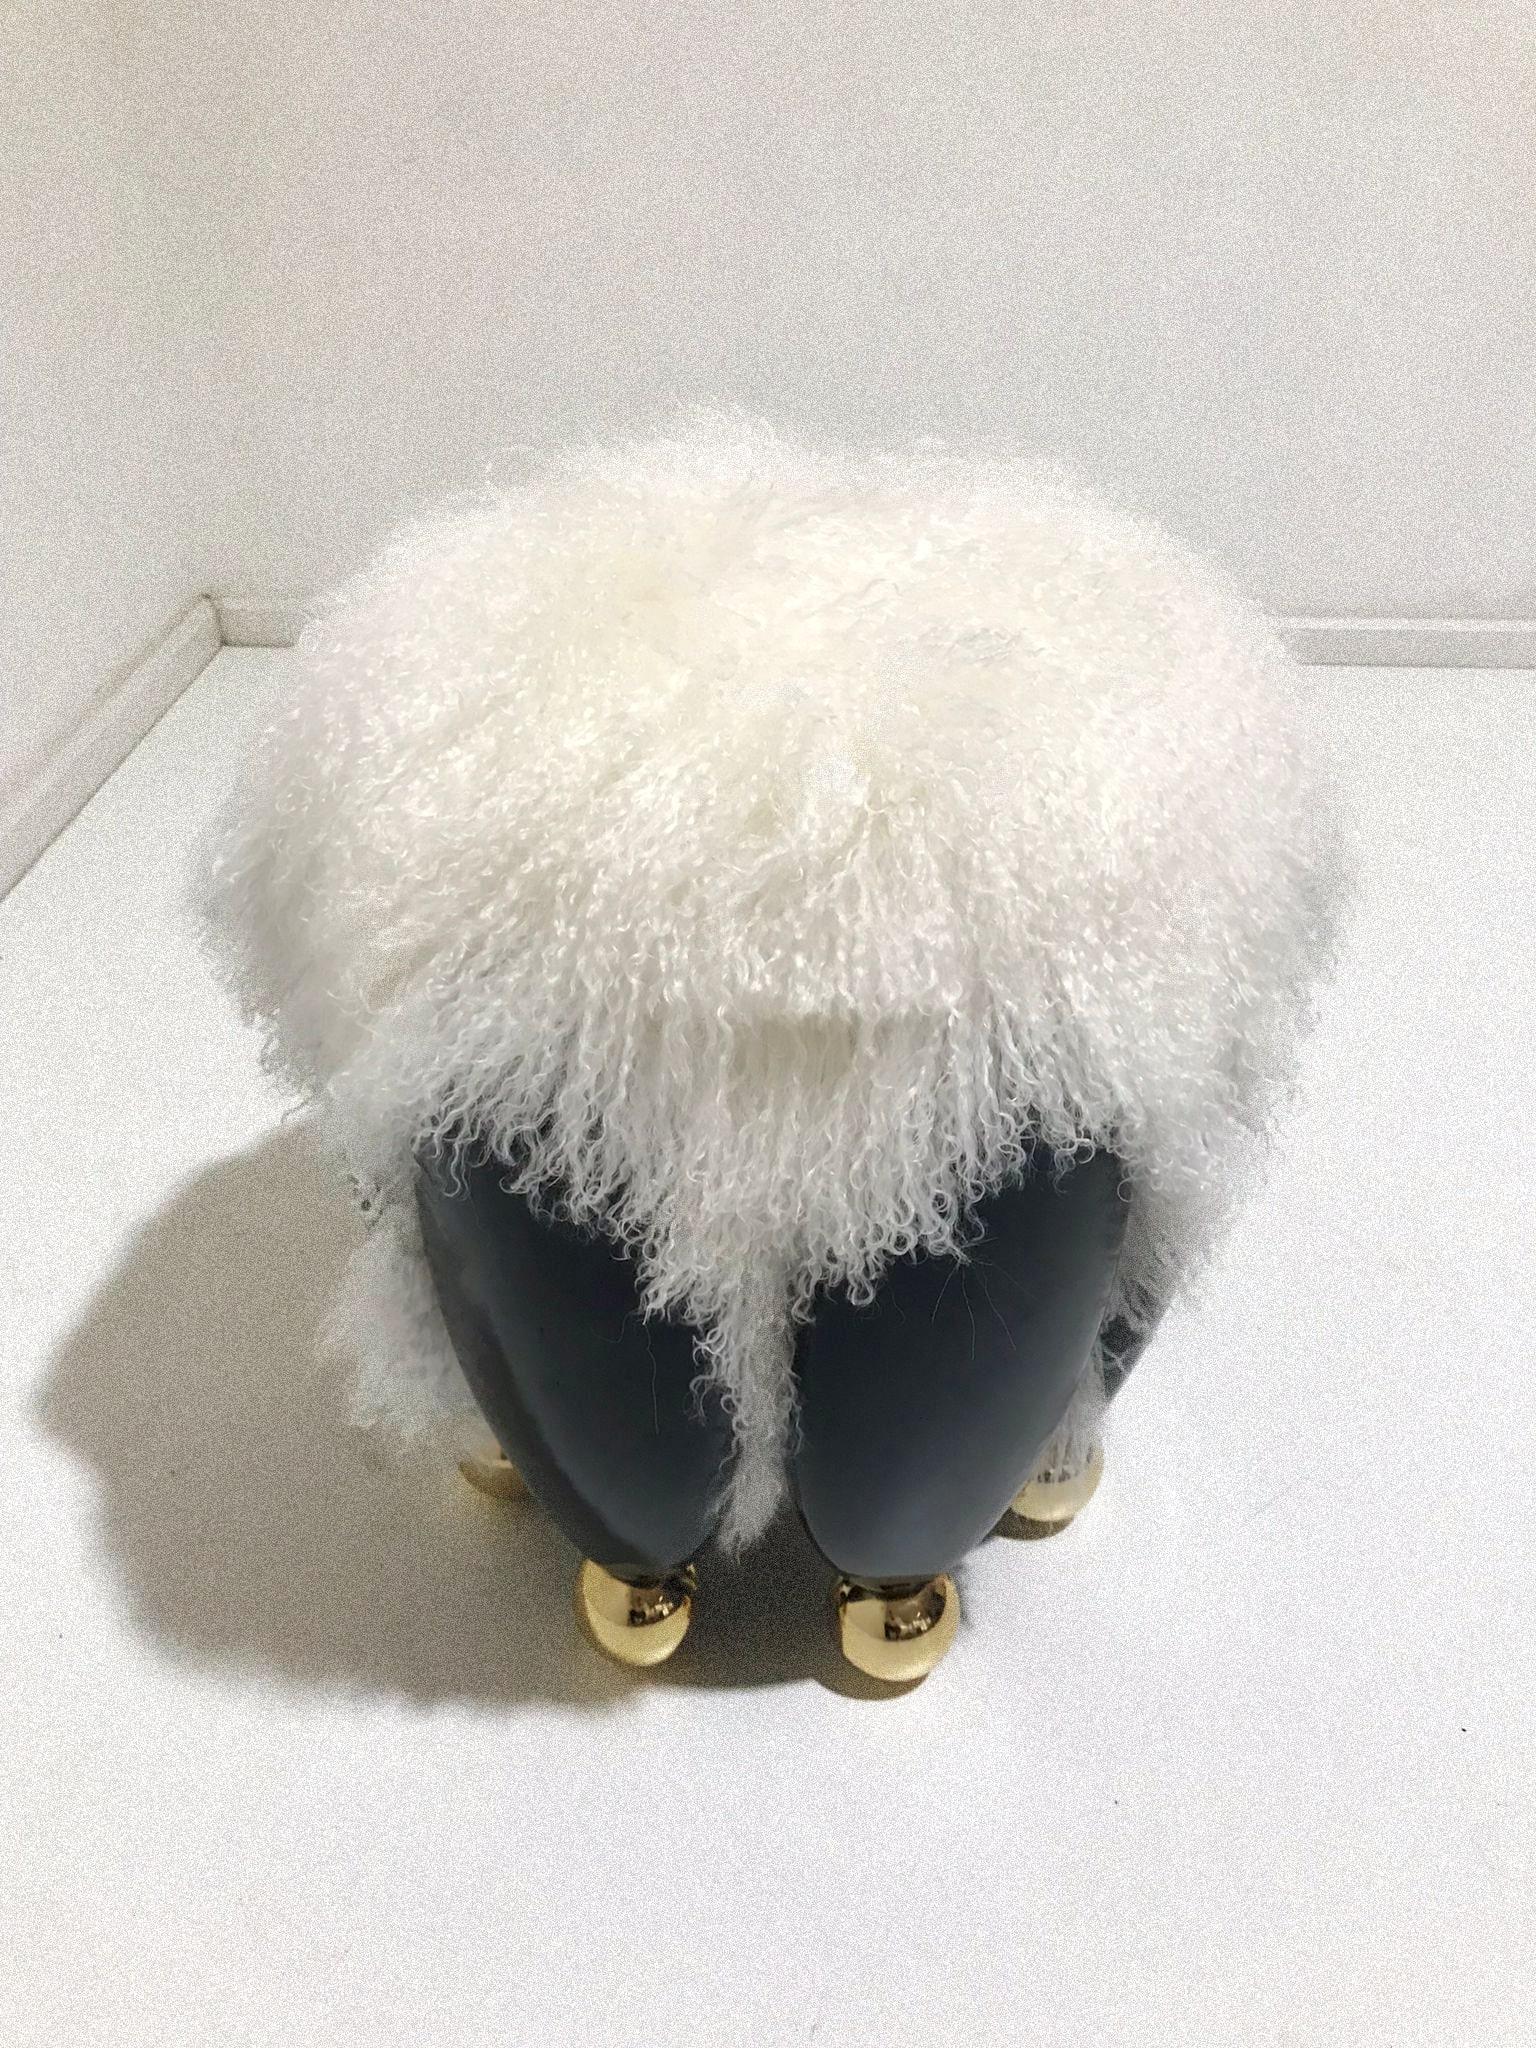 Modern Contemporary Black Stool Upholstered with Fur Top & Gold Spheres Details For Sale